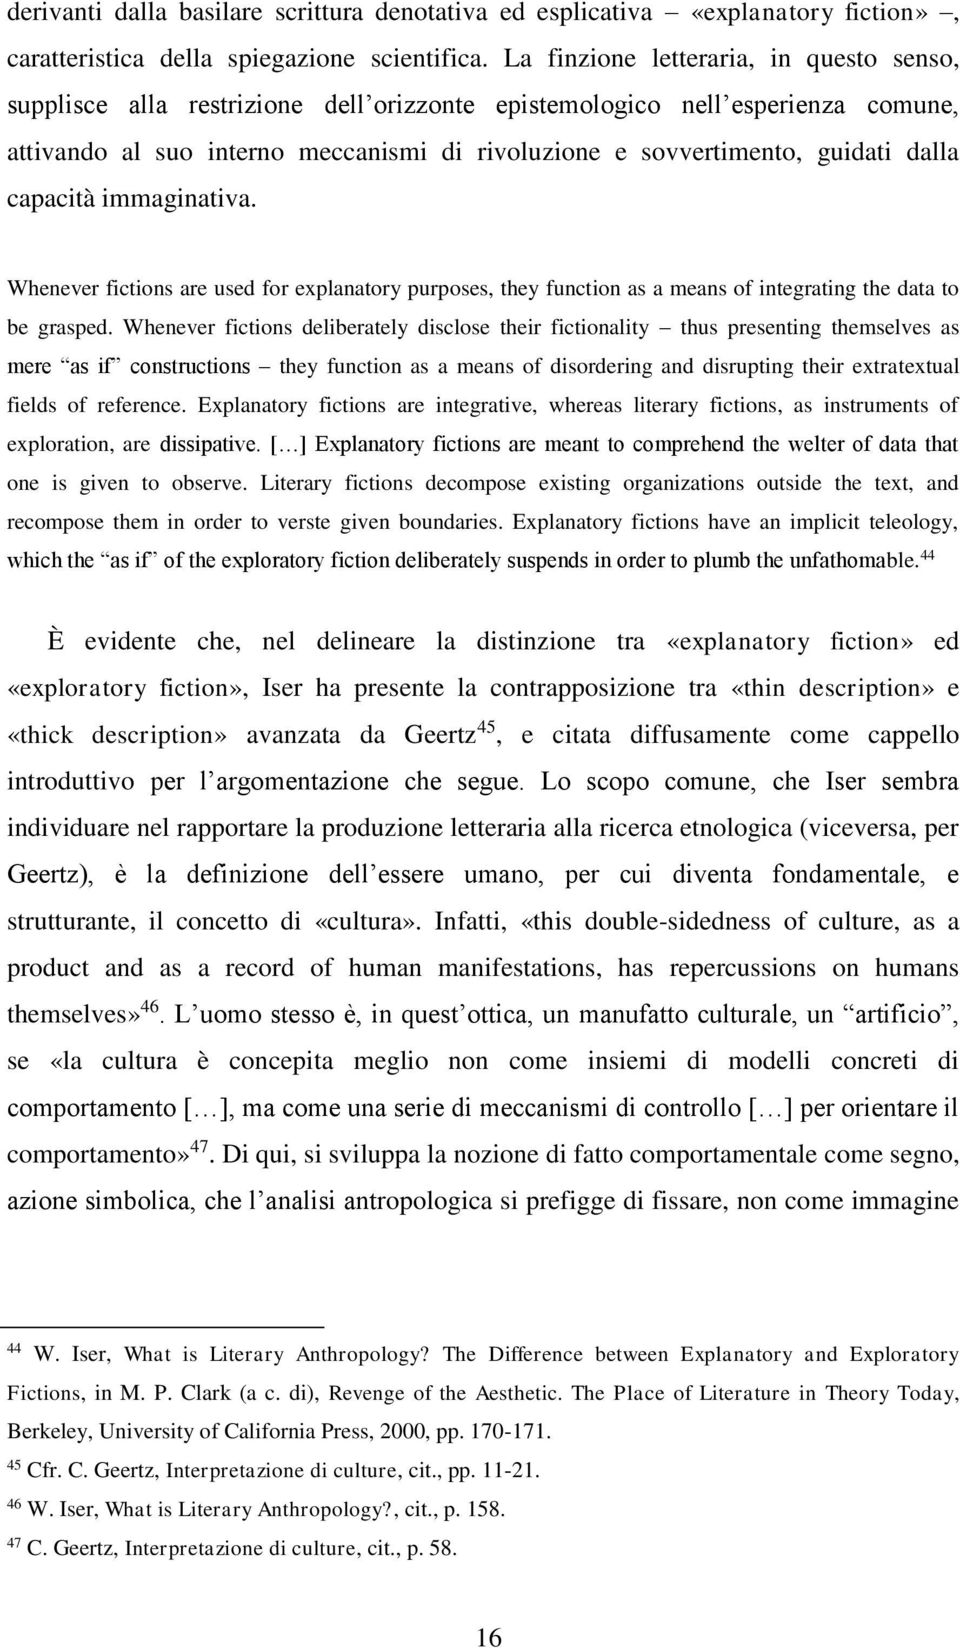 dalla capacità immaginativa. Whenever fictions are used for explanatory purposes, they function as a means of integrating the data to be grasped.